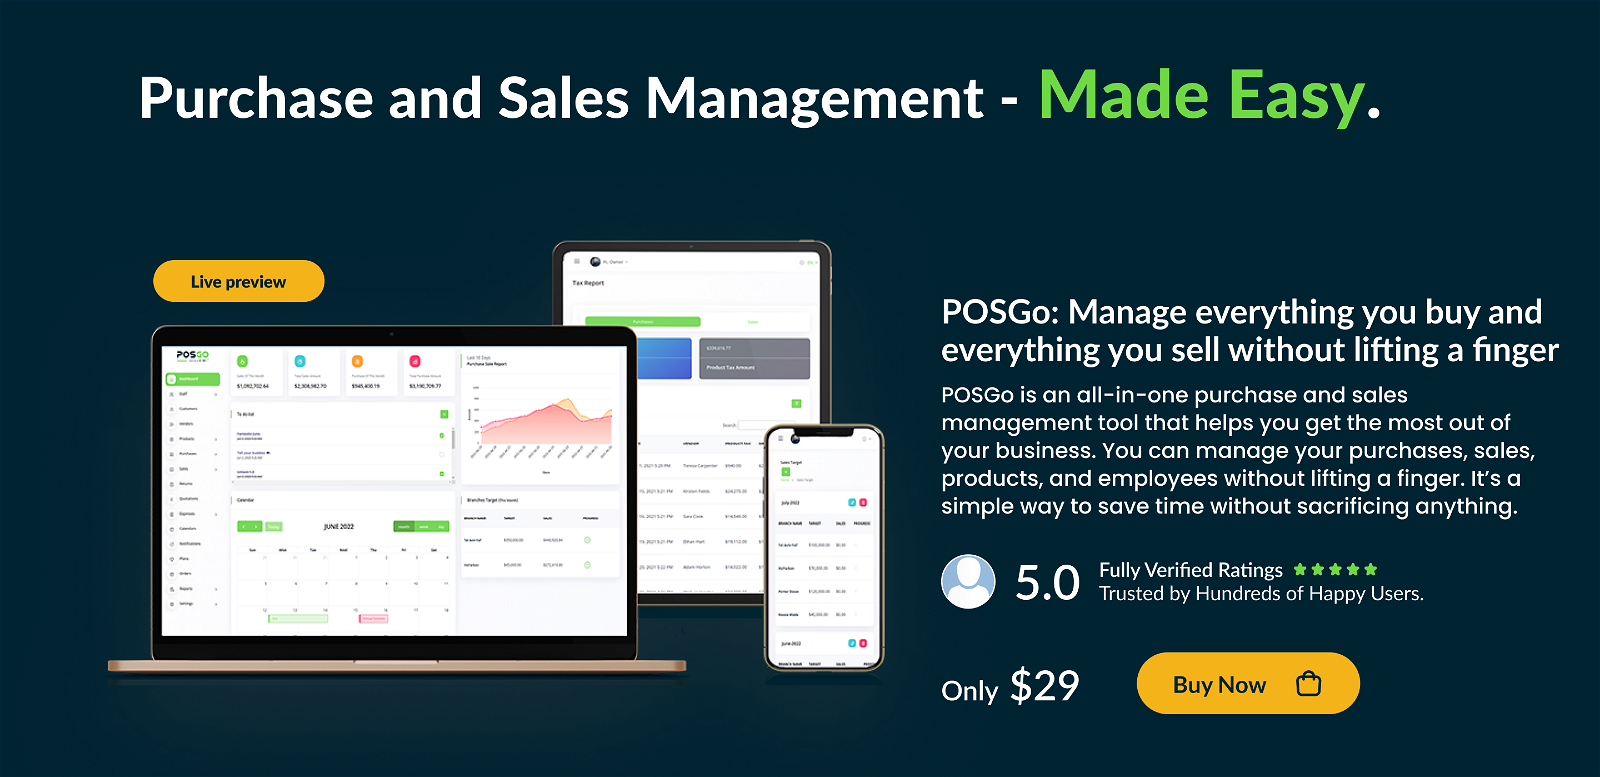 POSGo SaaS - Purchase and Sales Management Tool - 4